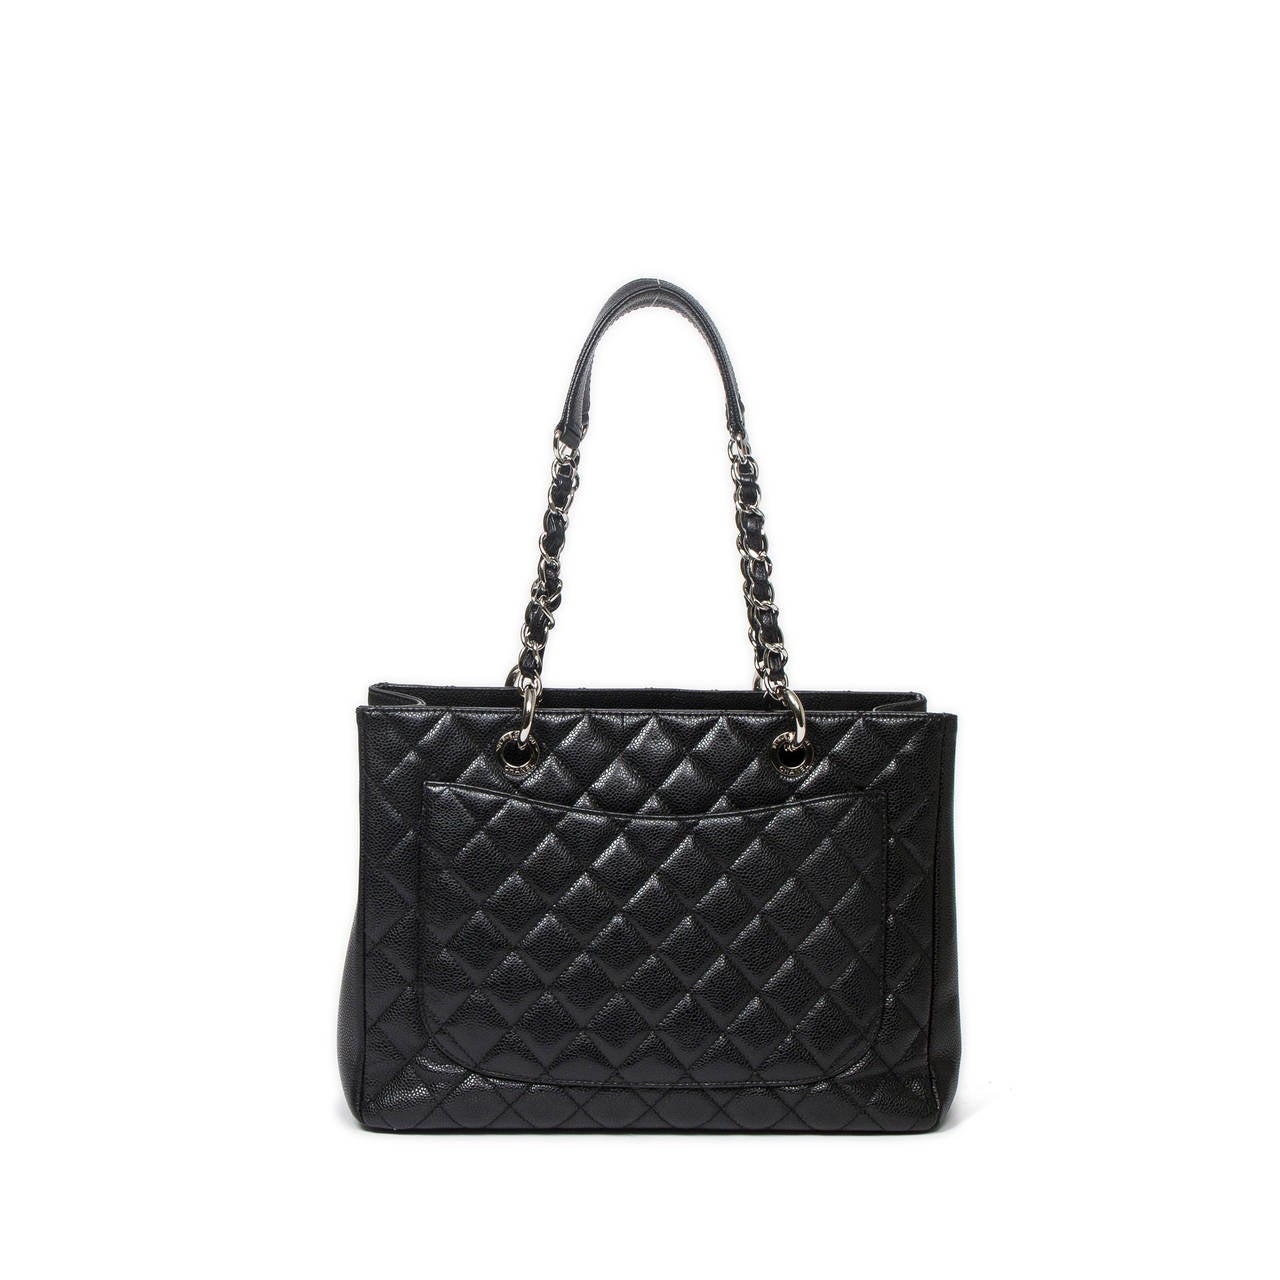 Chanel Gran Tote MM Shopper Black Grained Leather For Sale 1